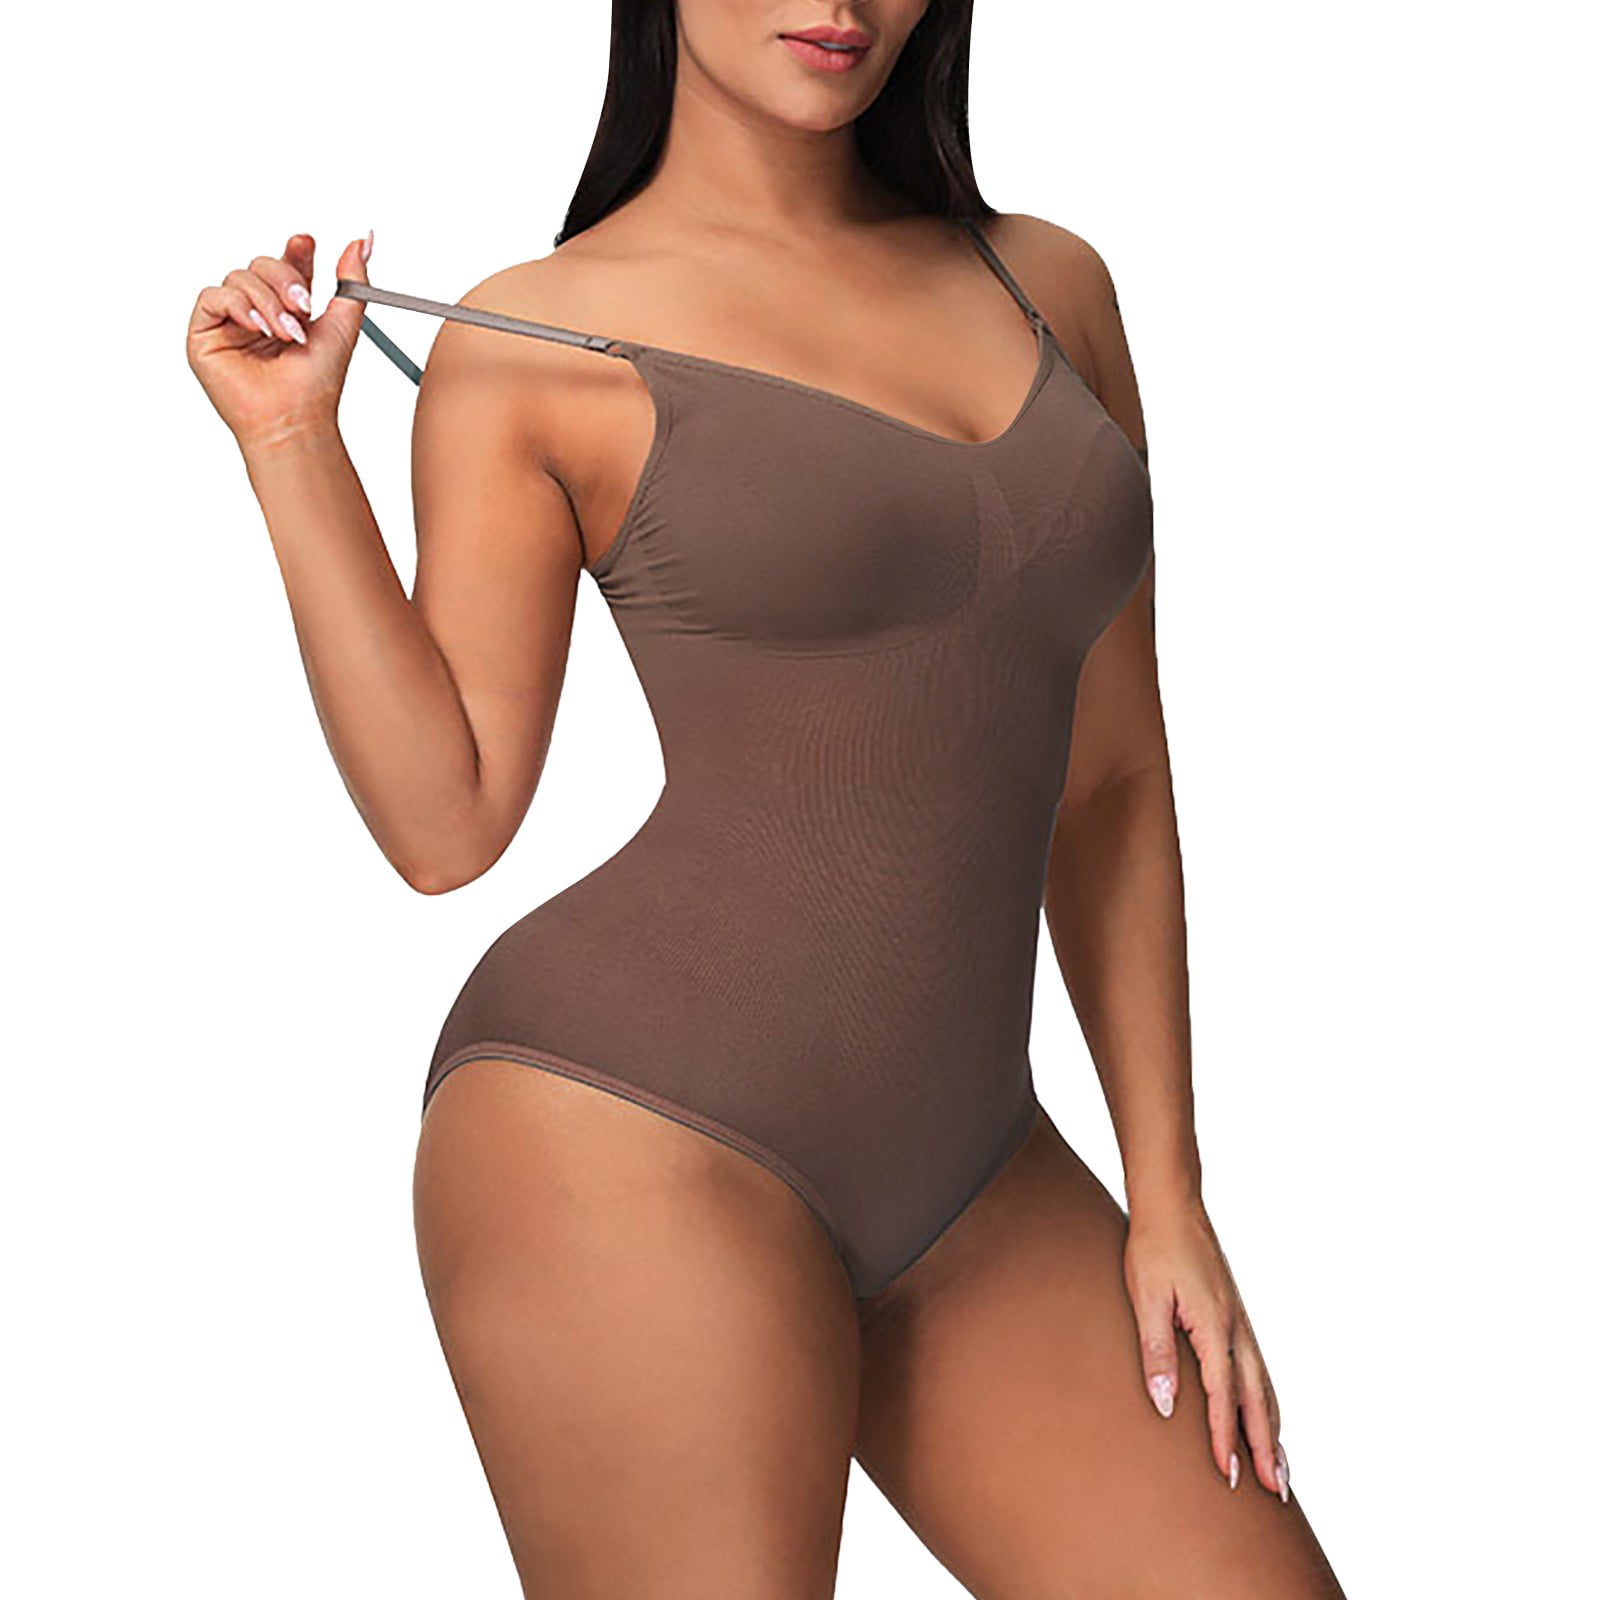 OLLOUM Athartle Body Suit Shapewear, Reteowlepena Bodysuit Shape Wear,  Shapewear Bodysuit, Shapewear for Women Tummy Control (Color :  Nude-Triangle